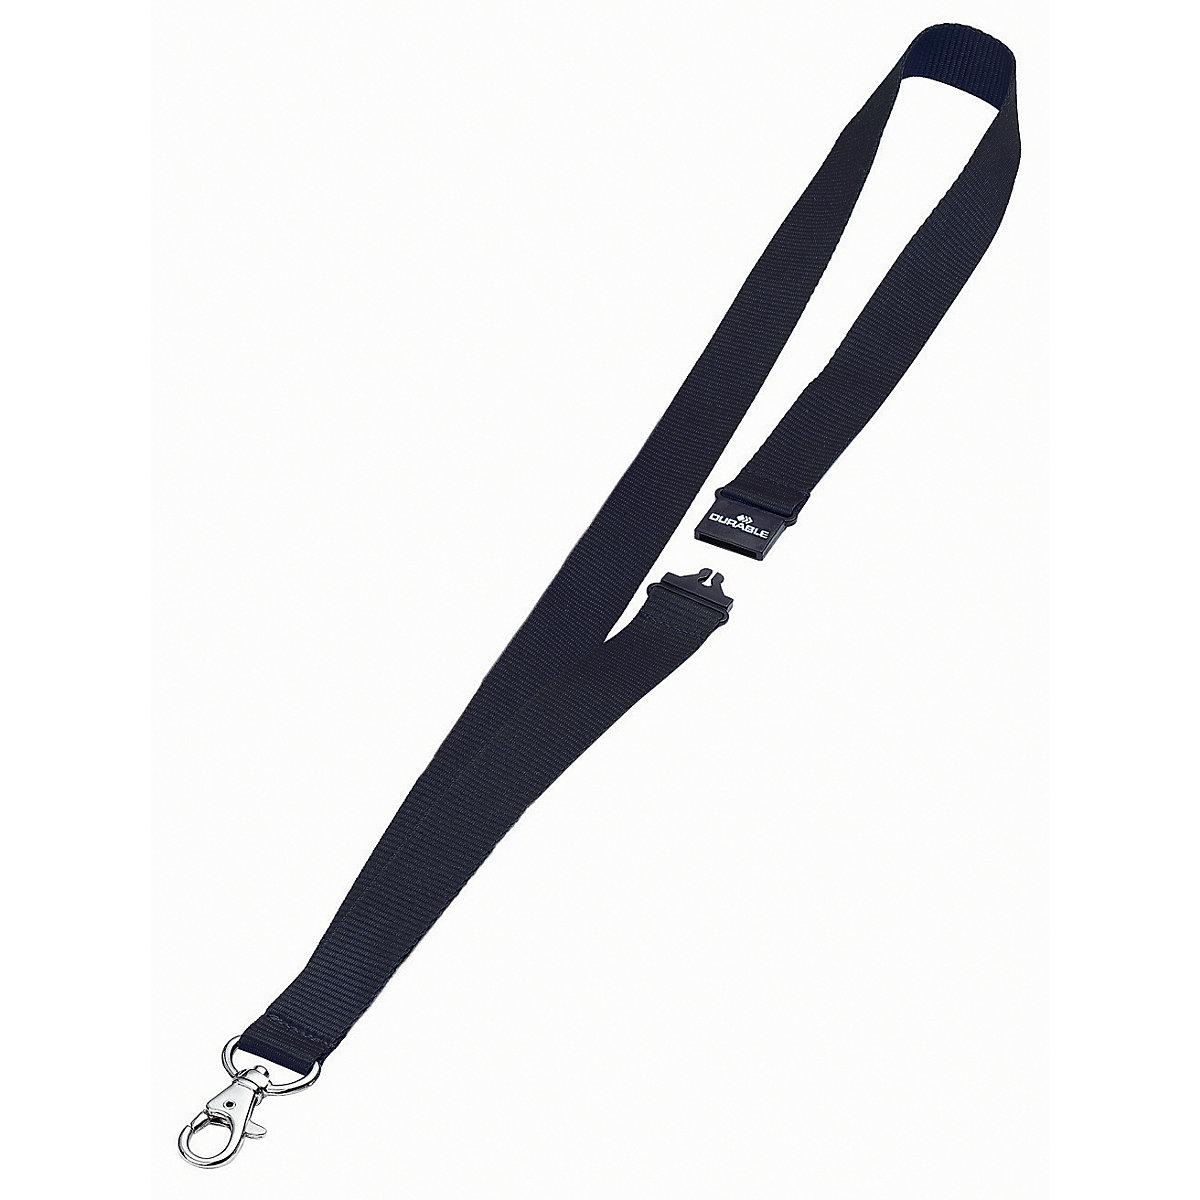 Fabric straps with snap hook – DURABLE